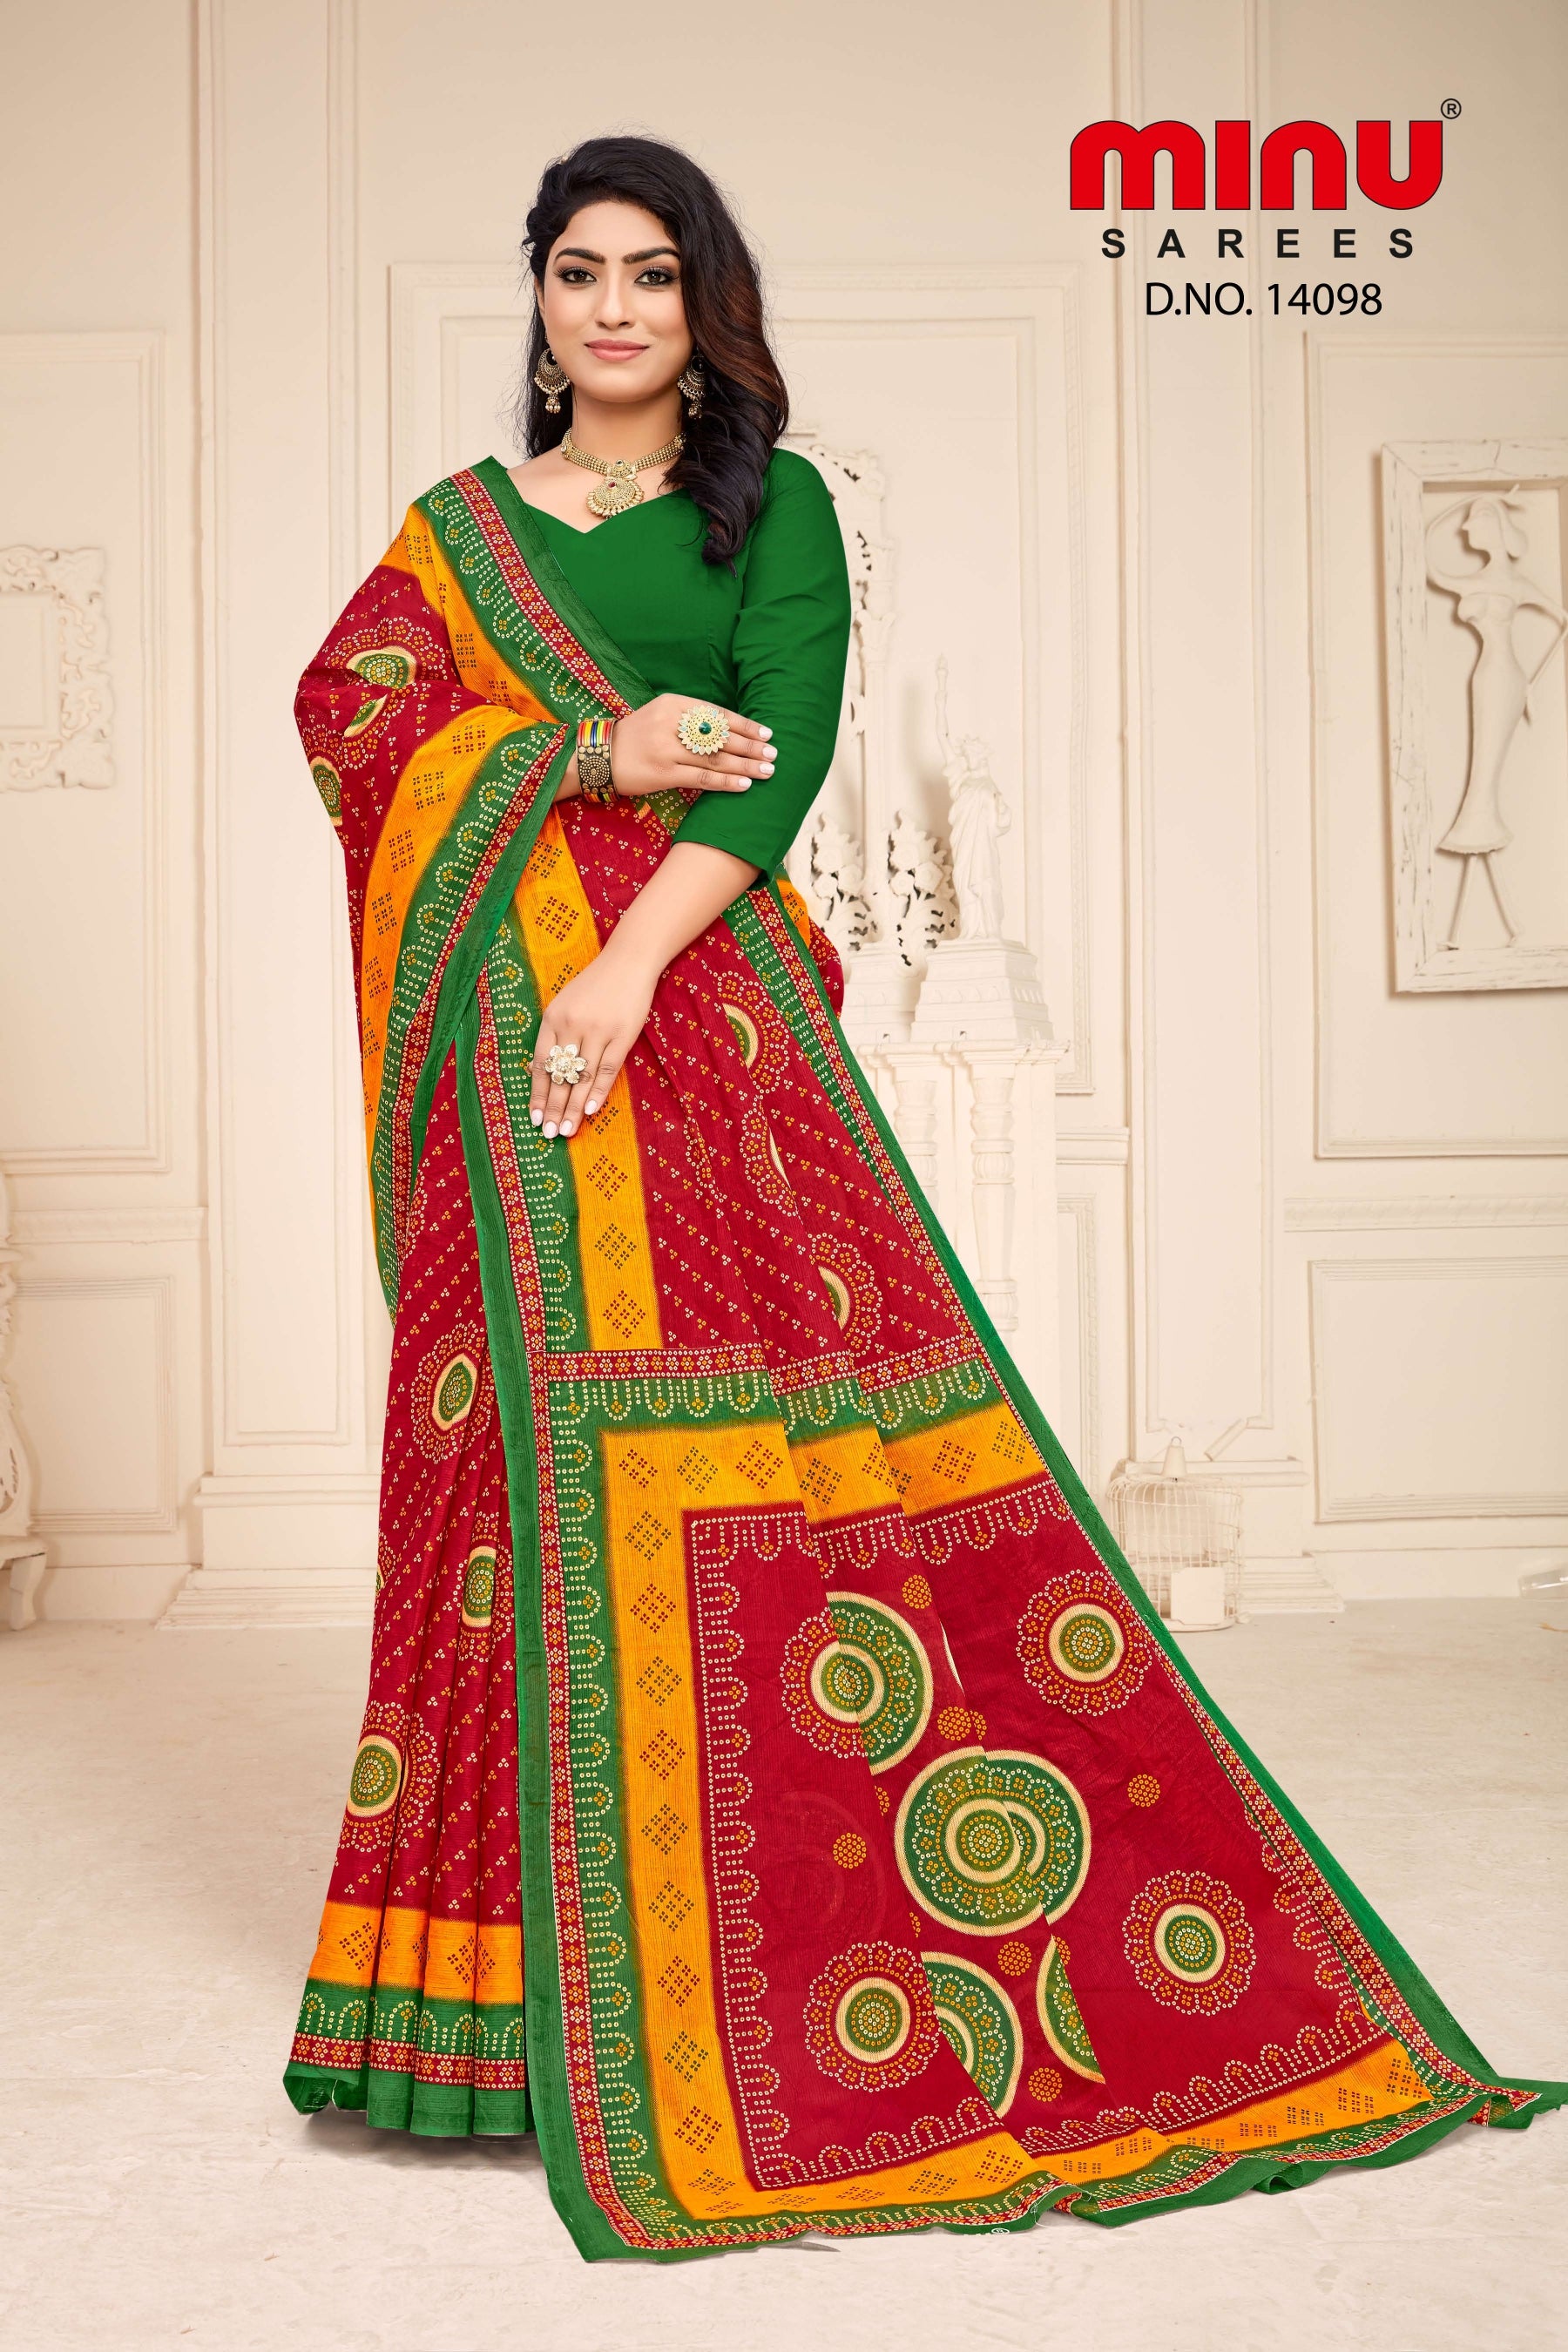 Woman wearing  printed saree for retailers image